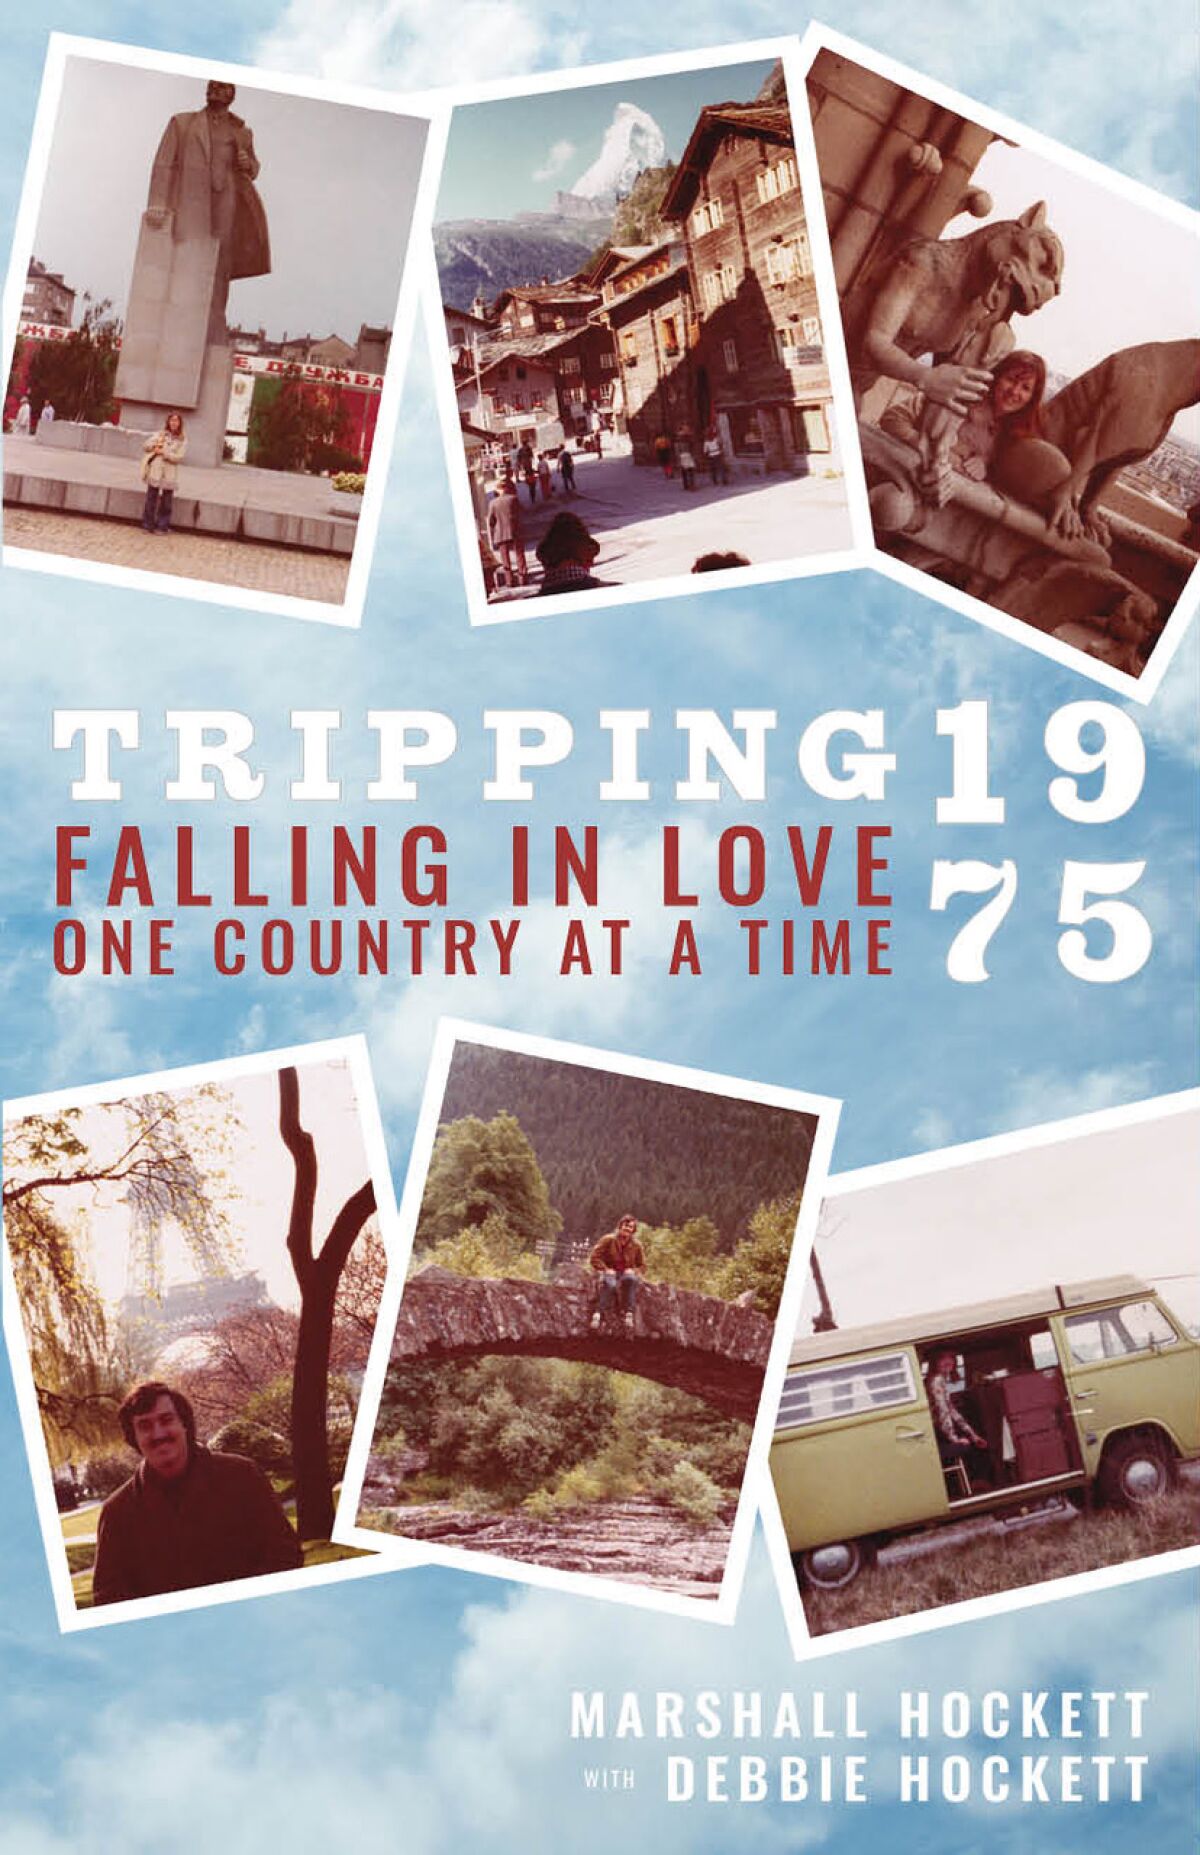 The cover of “Tripping 1975, Falling in Love One Country at a Time.”